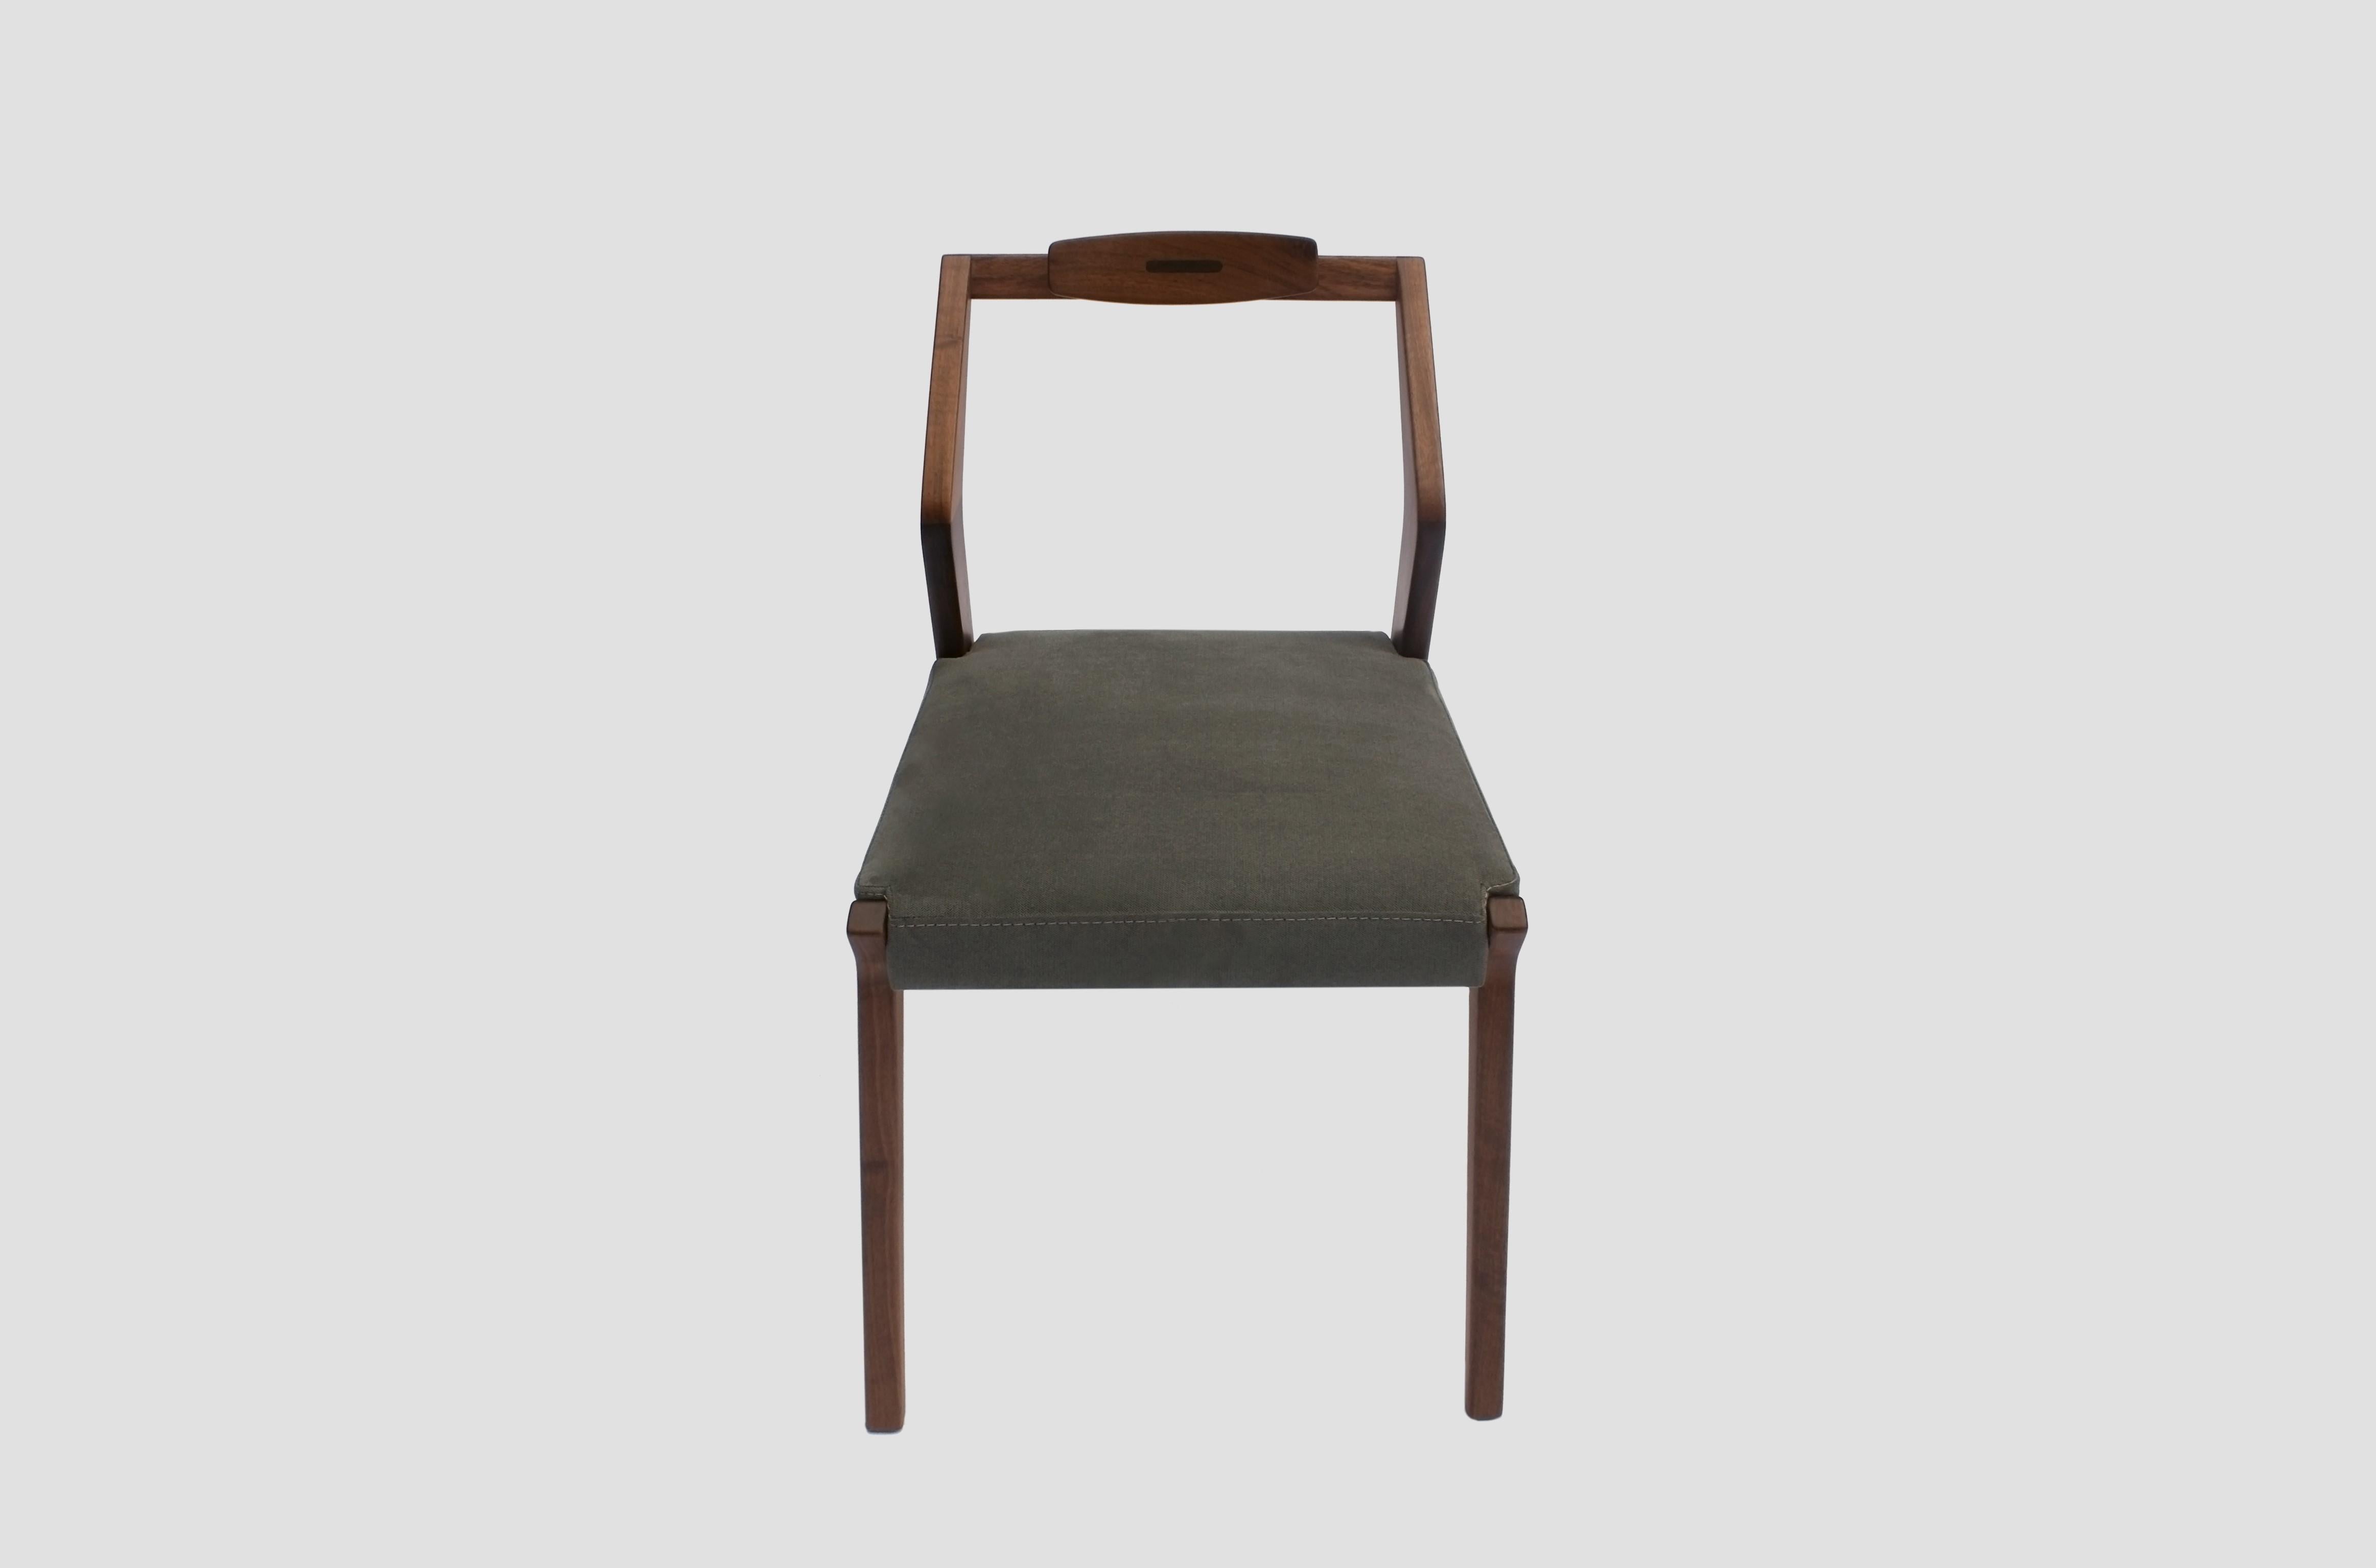 Boomerang light dining chair by Arturo Verástegui
Dimensions: D 50 x W 60 x H 85 cm
Materials: walnut wood, fabric.

Dining chair made of solid holm walnut with fabric or leather.

Arturo Verástegui has been the director and founder of Breuer